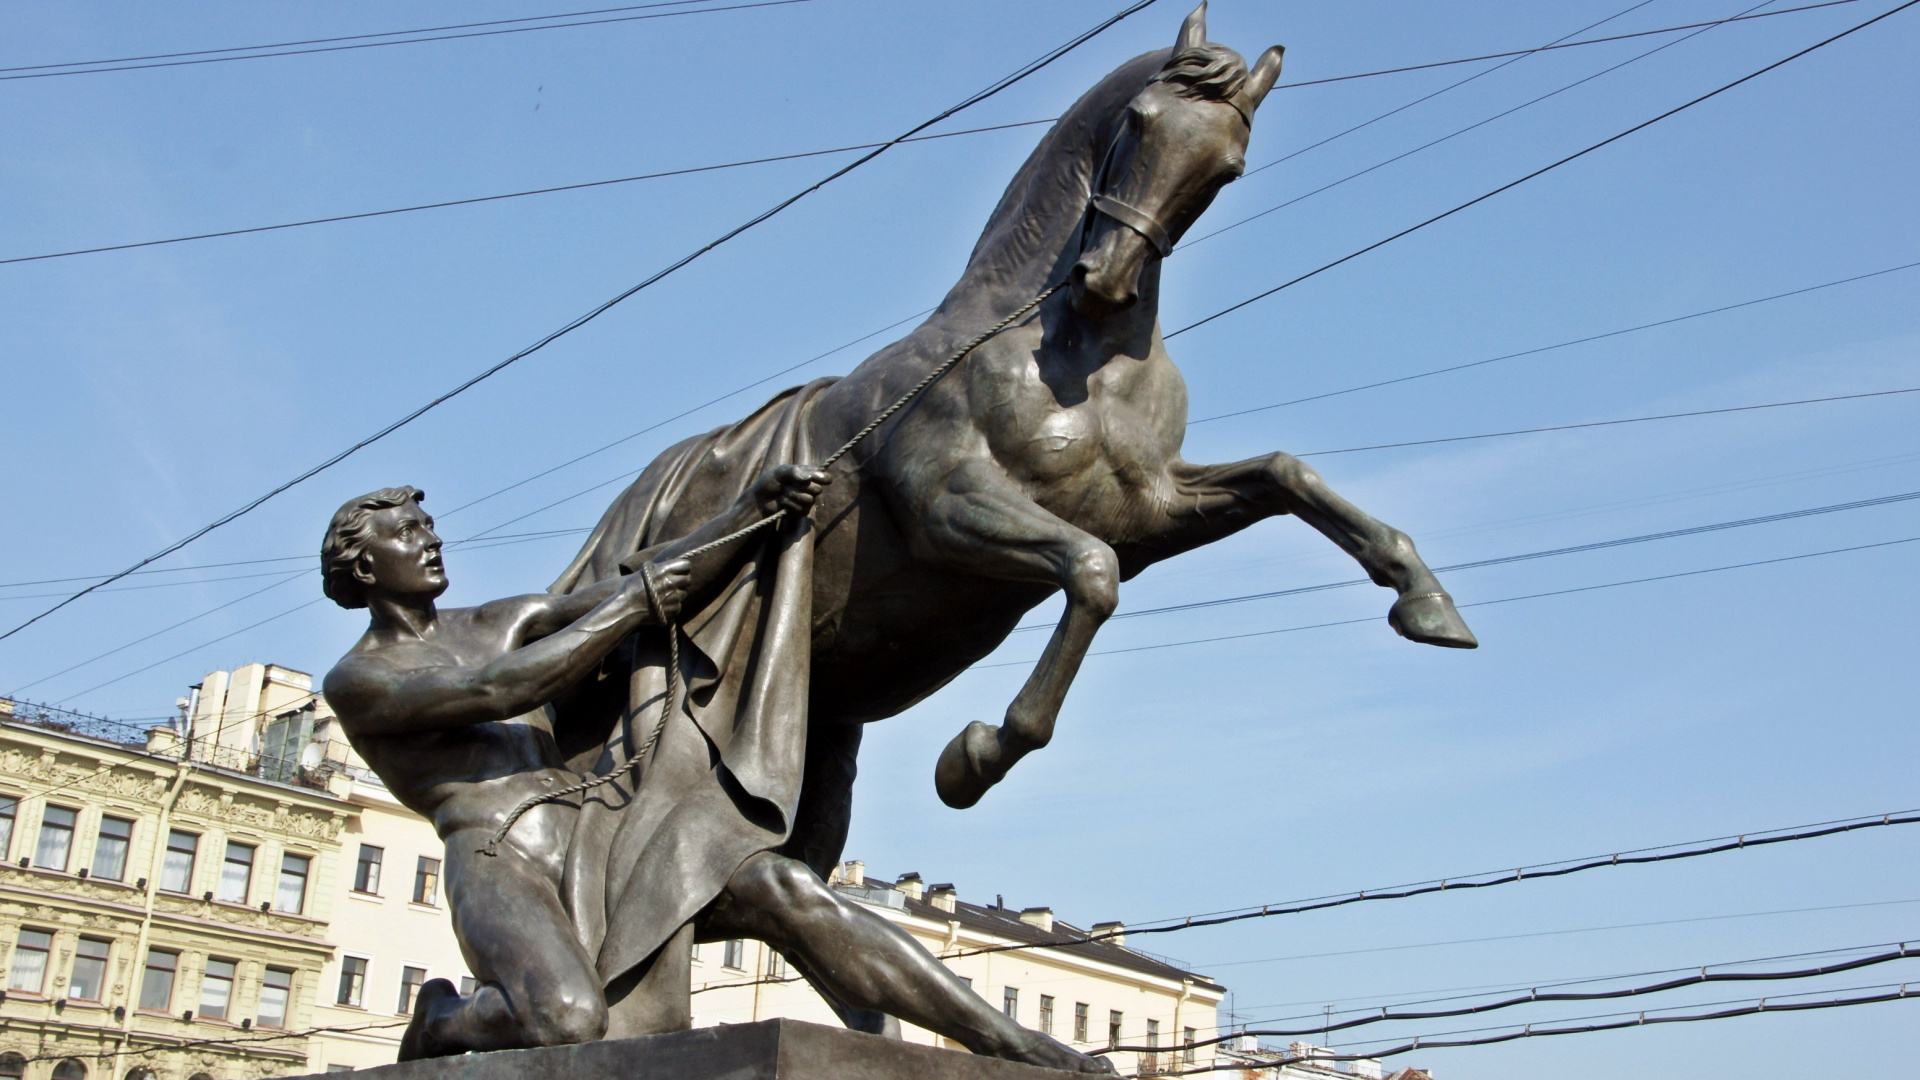 Man Riding Horse Statue Under Blue Sky During Daytime. Wallpaper in 1920x1080 Resolution